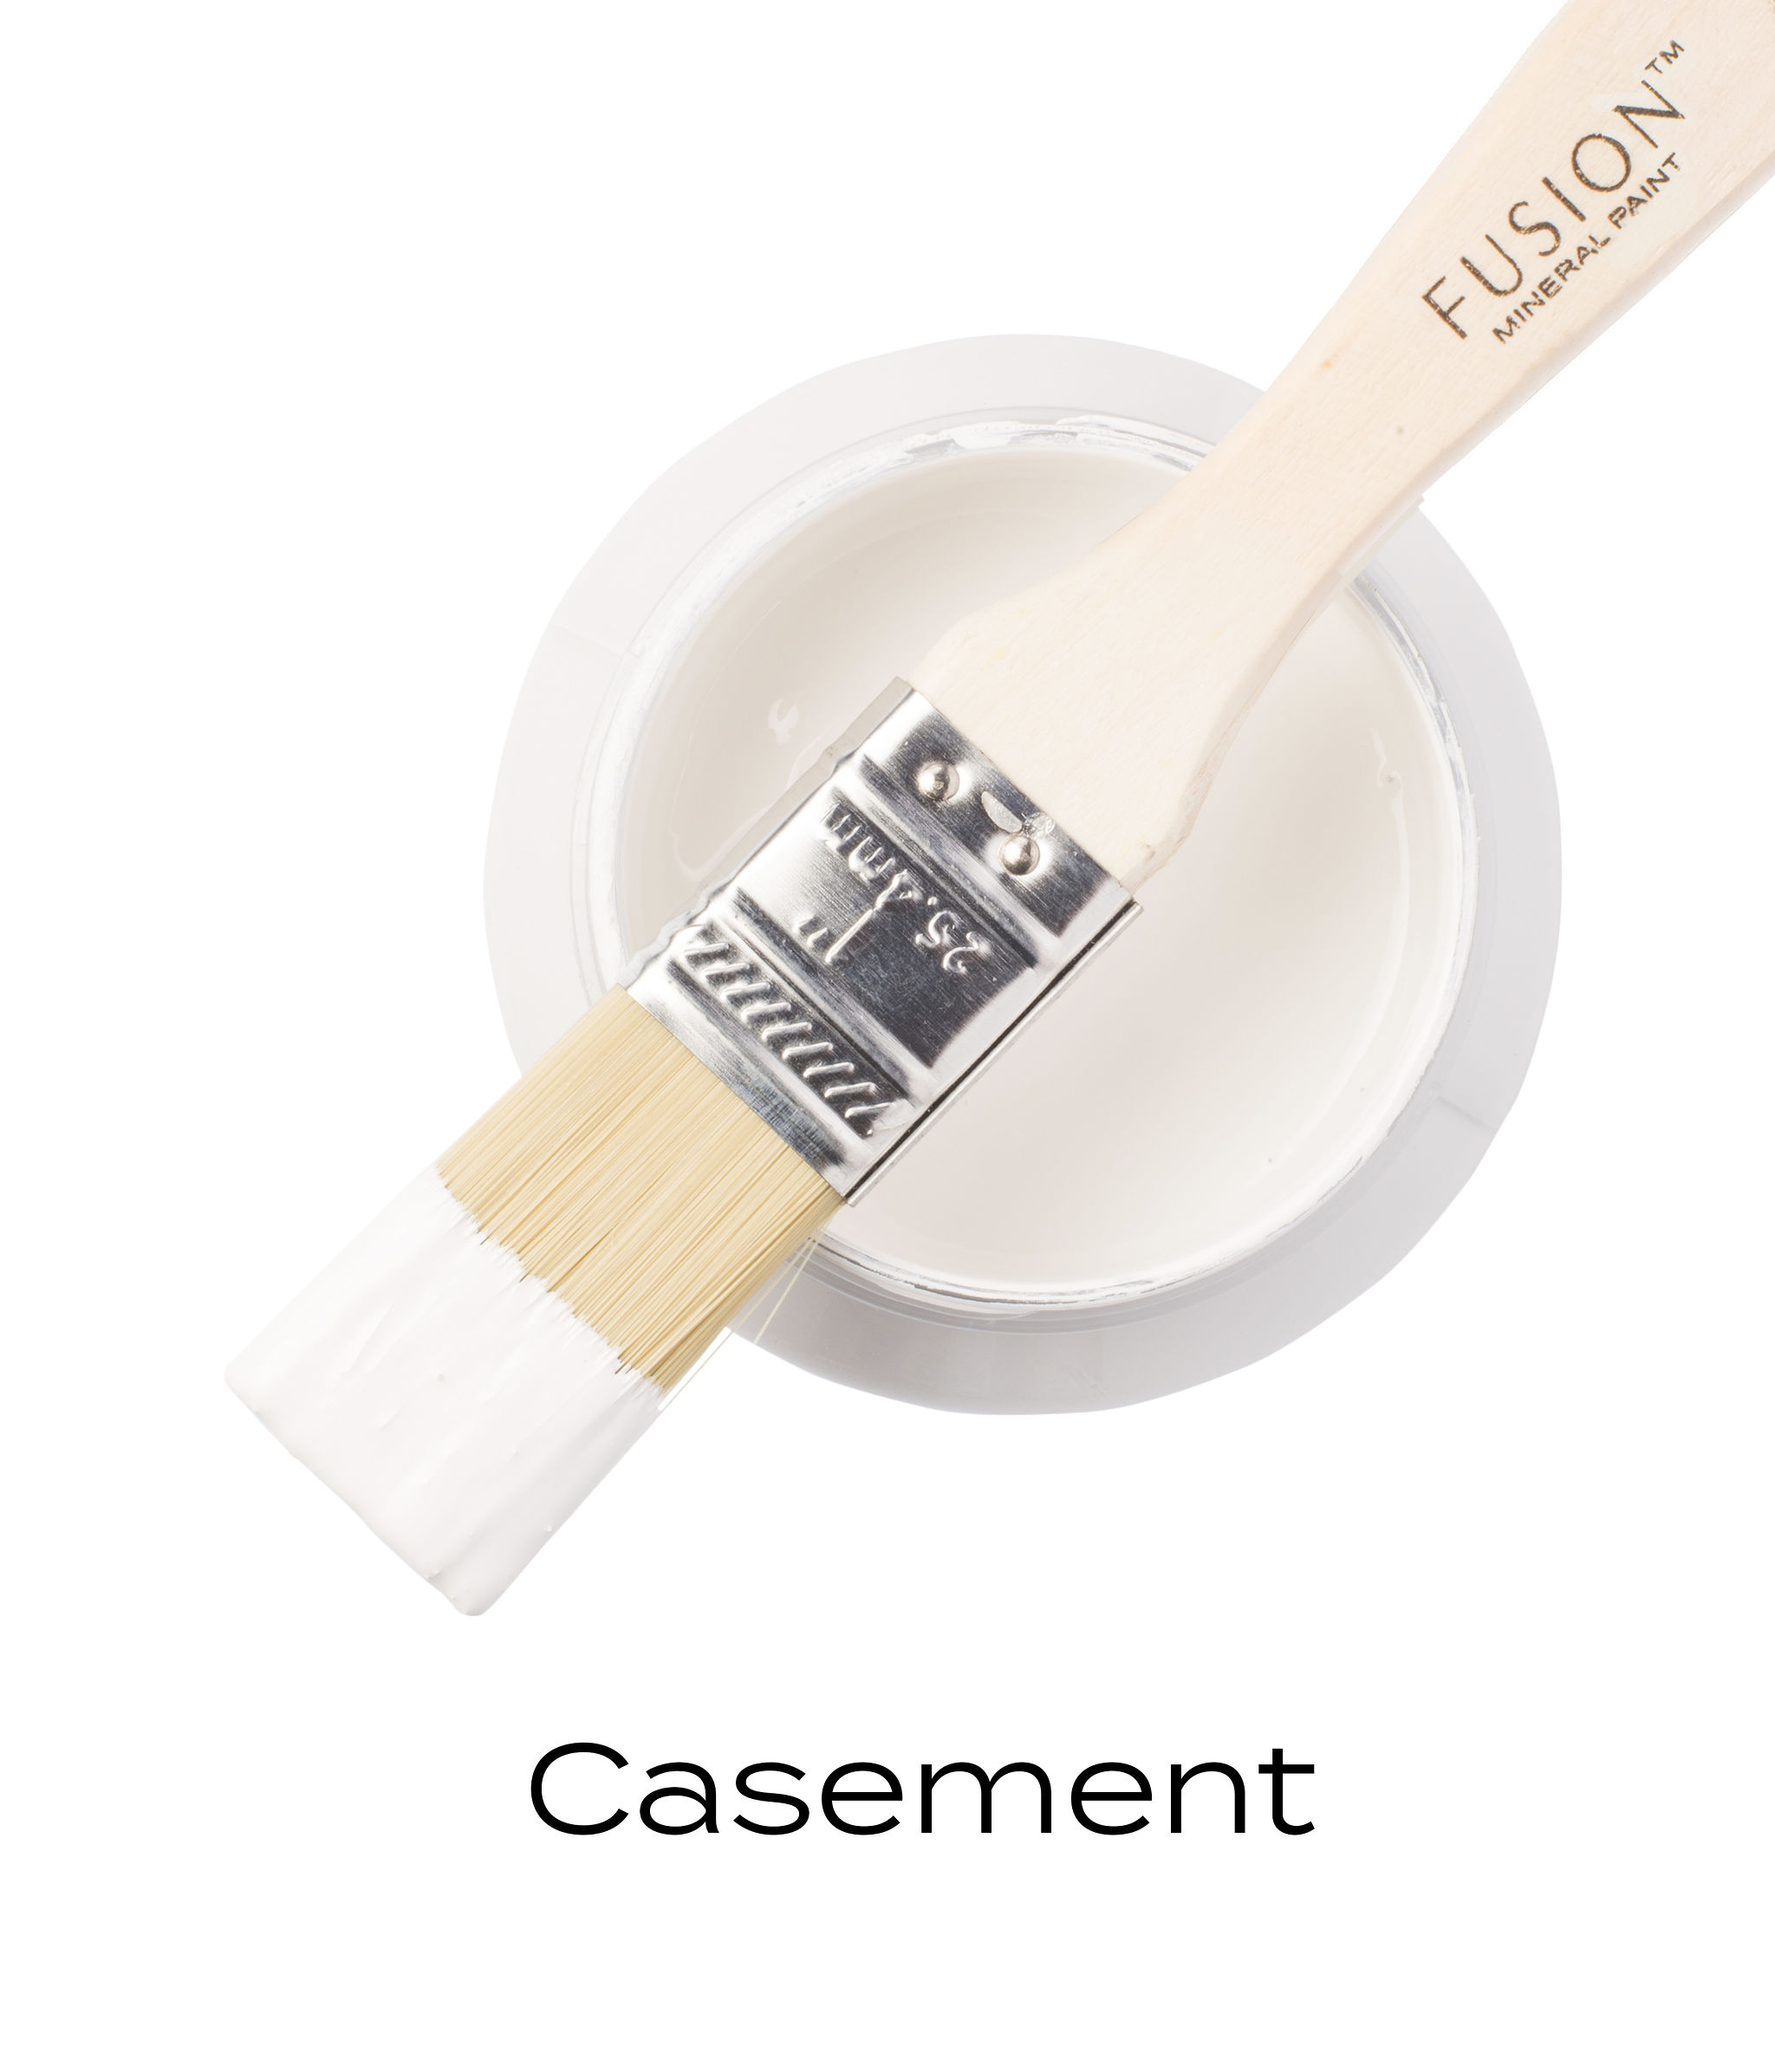 Casement Fusion Mineral Paint Goed Gestyled Brielle